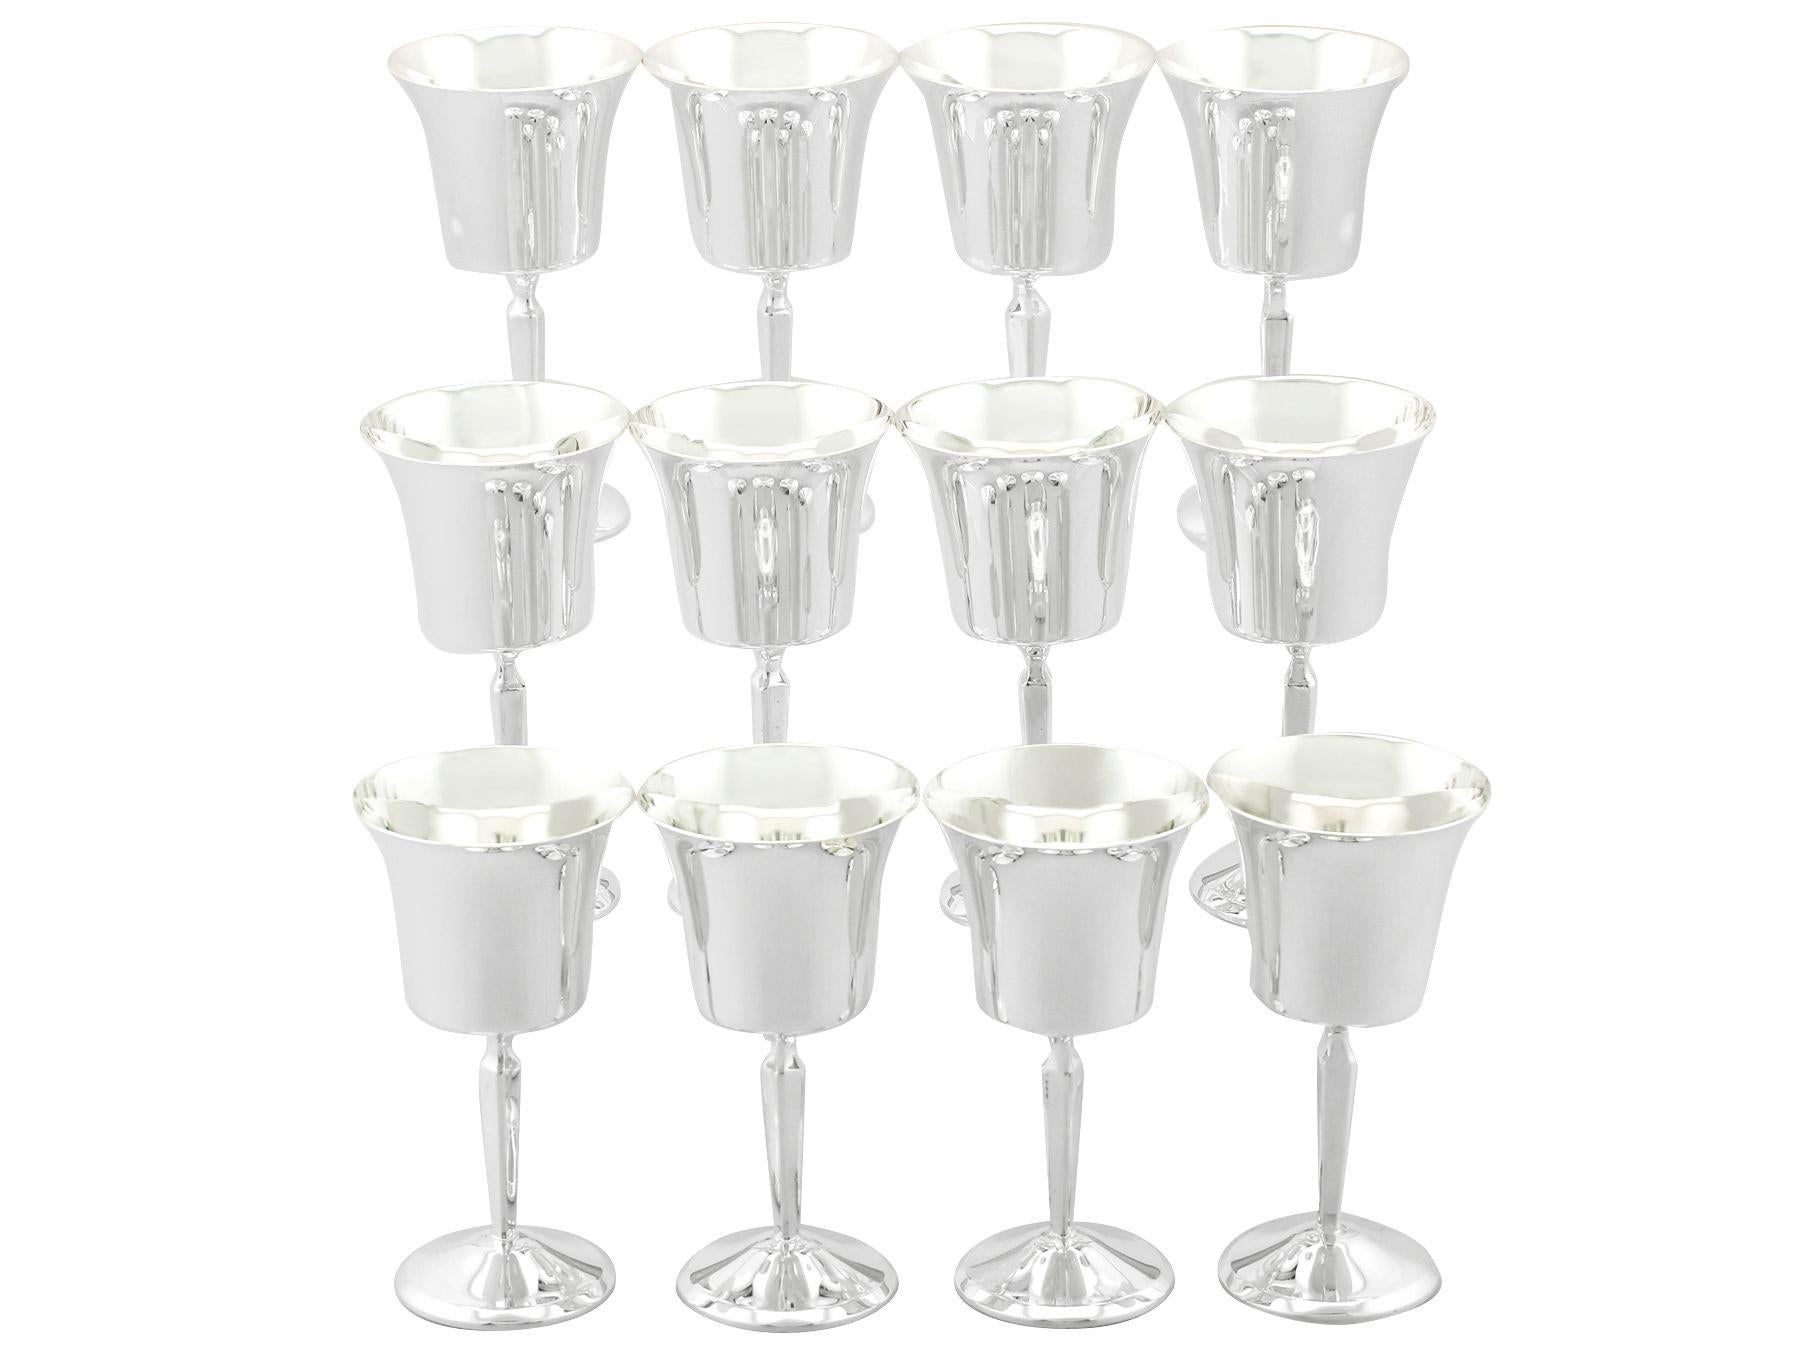 An exceptional, fine and impressive vintage Elizabeth II English sterling silver goblets; an addition to our range of wine and drink related silverware.

These exceptional vintage sterling silver goblets have a flared bell shaped form supported by a